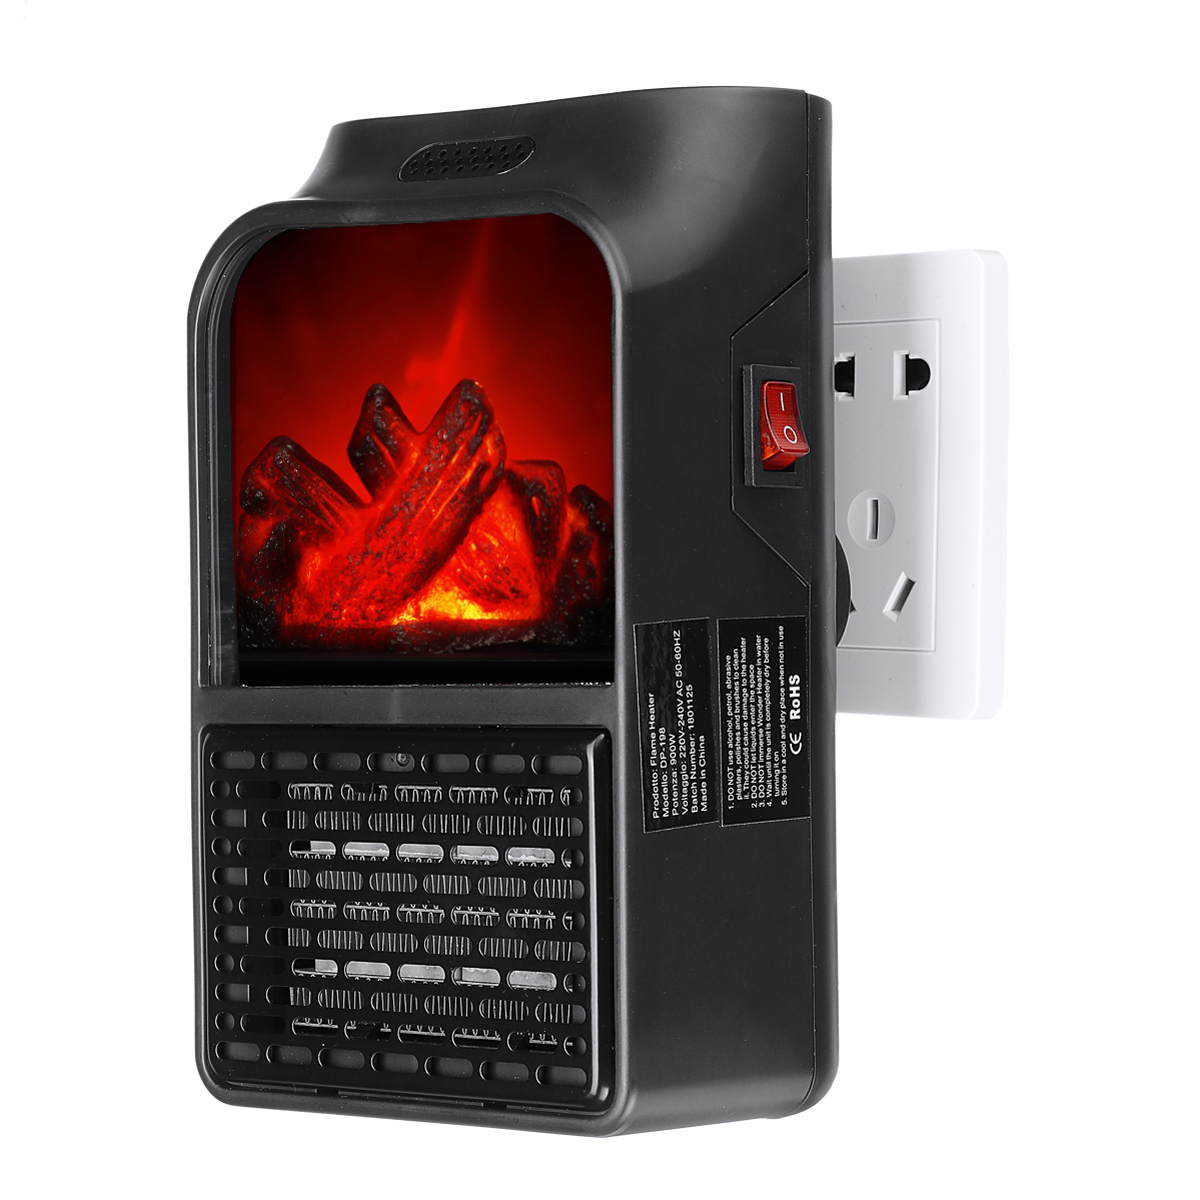 Heater that Looks Like A Fireplace Lovely 900w 220v Electric Heater Fan Fireplace Flame Timer Space Heater for Home Fice